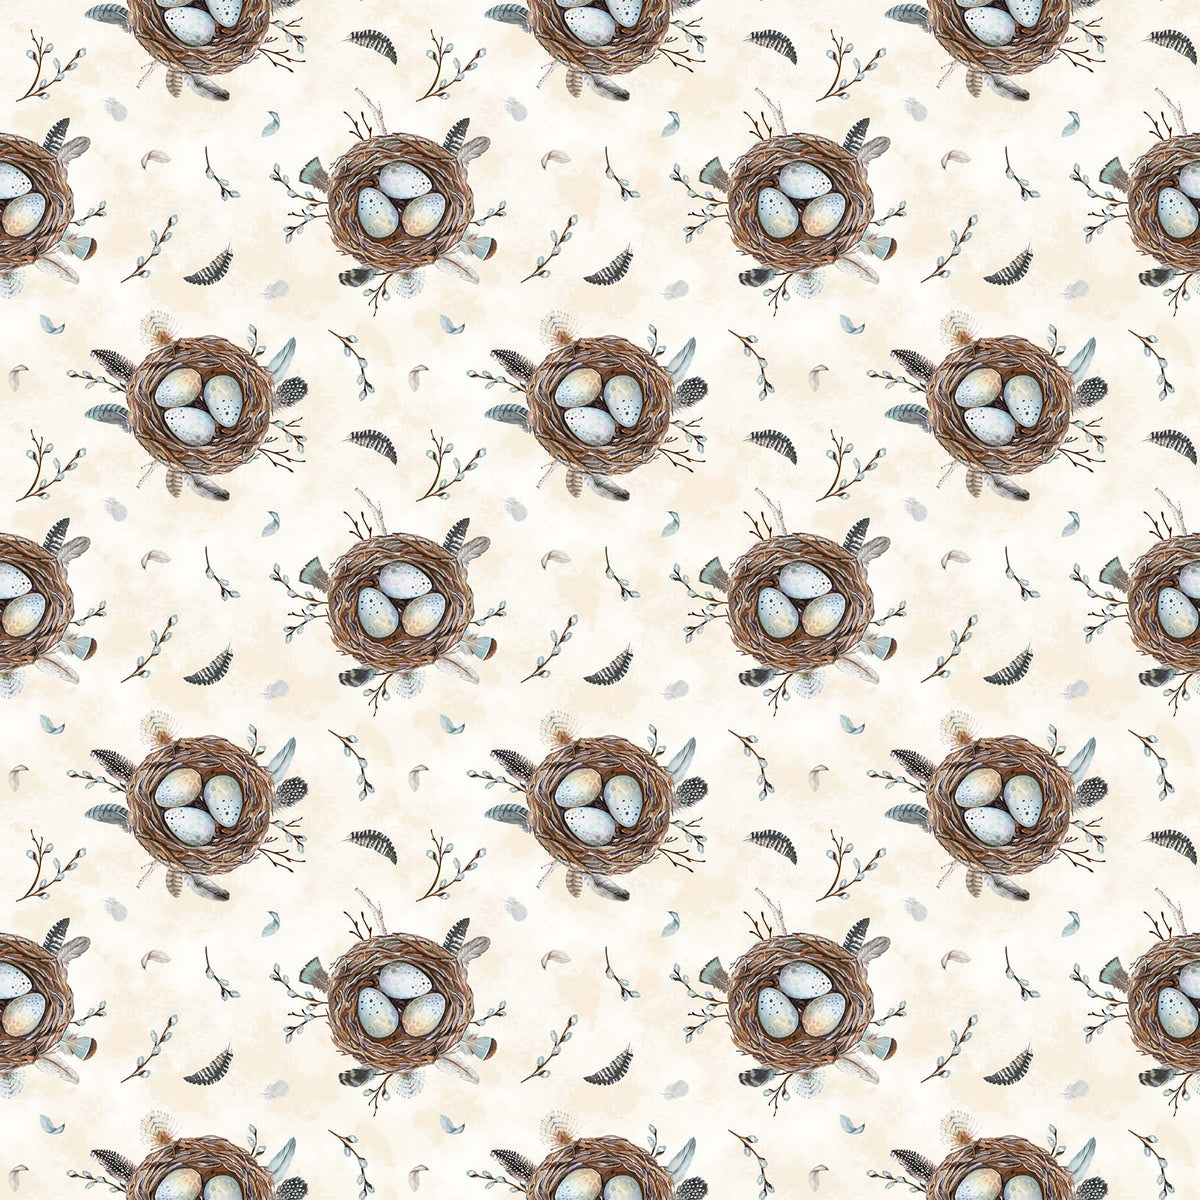 Feathered Nest Quilt Fabric - Feathered Nest in Cream/Multi - 24394-11